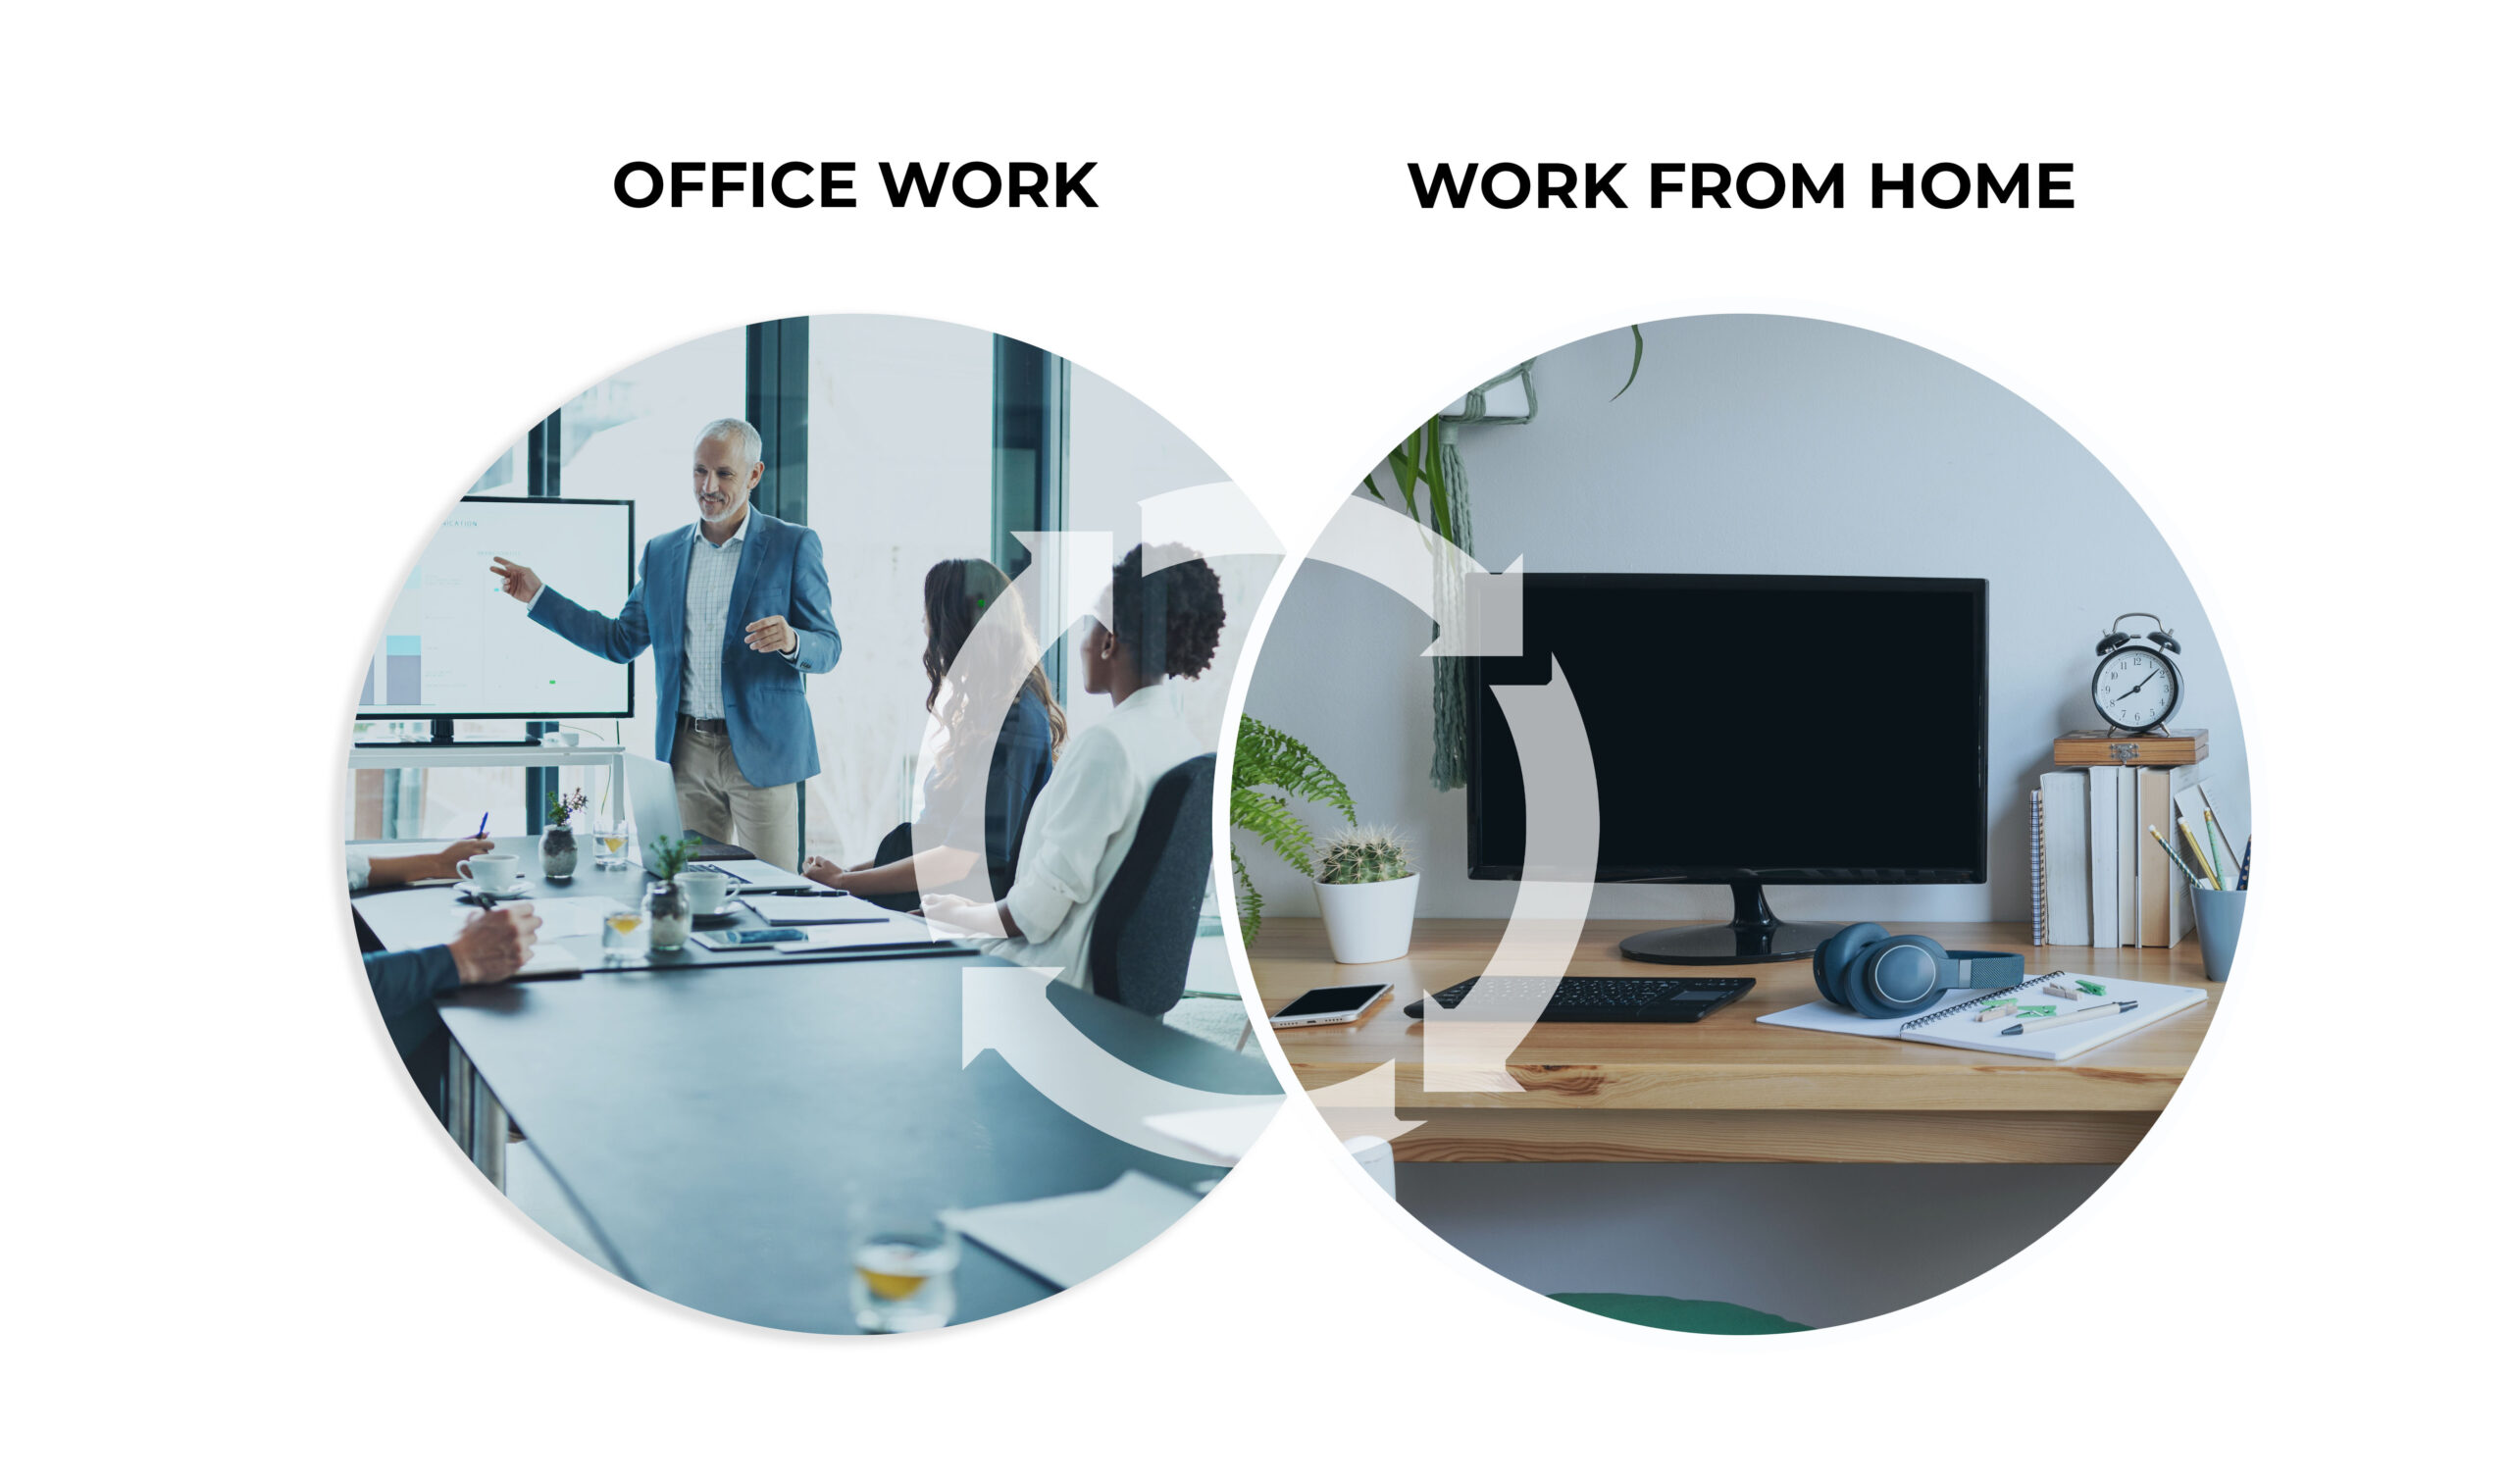 Remote Work- A Venn Diagram, office setup on the left, Hybrid Work in the middle, WFH setup on the right